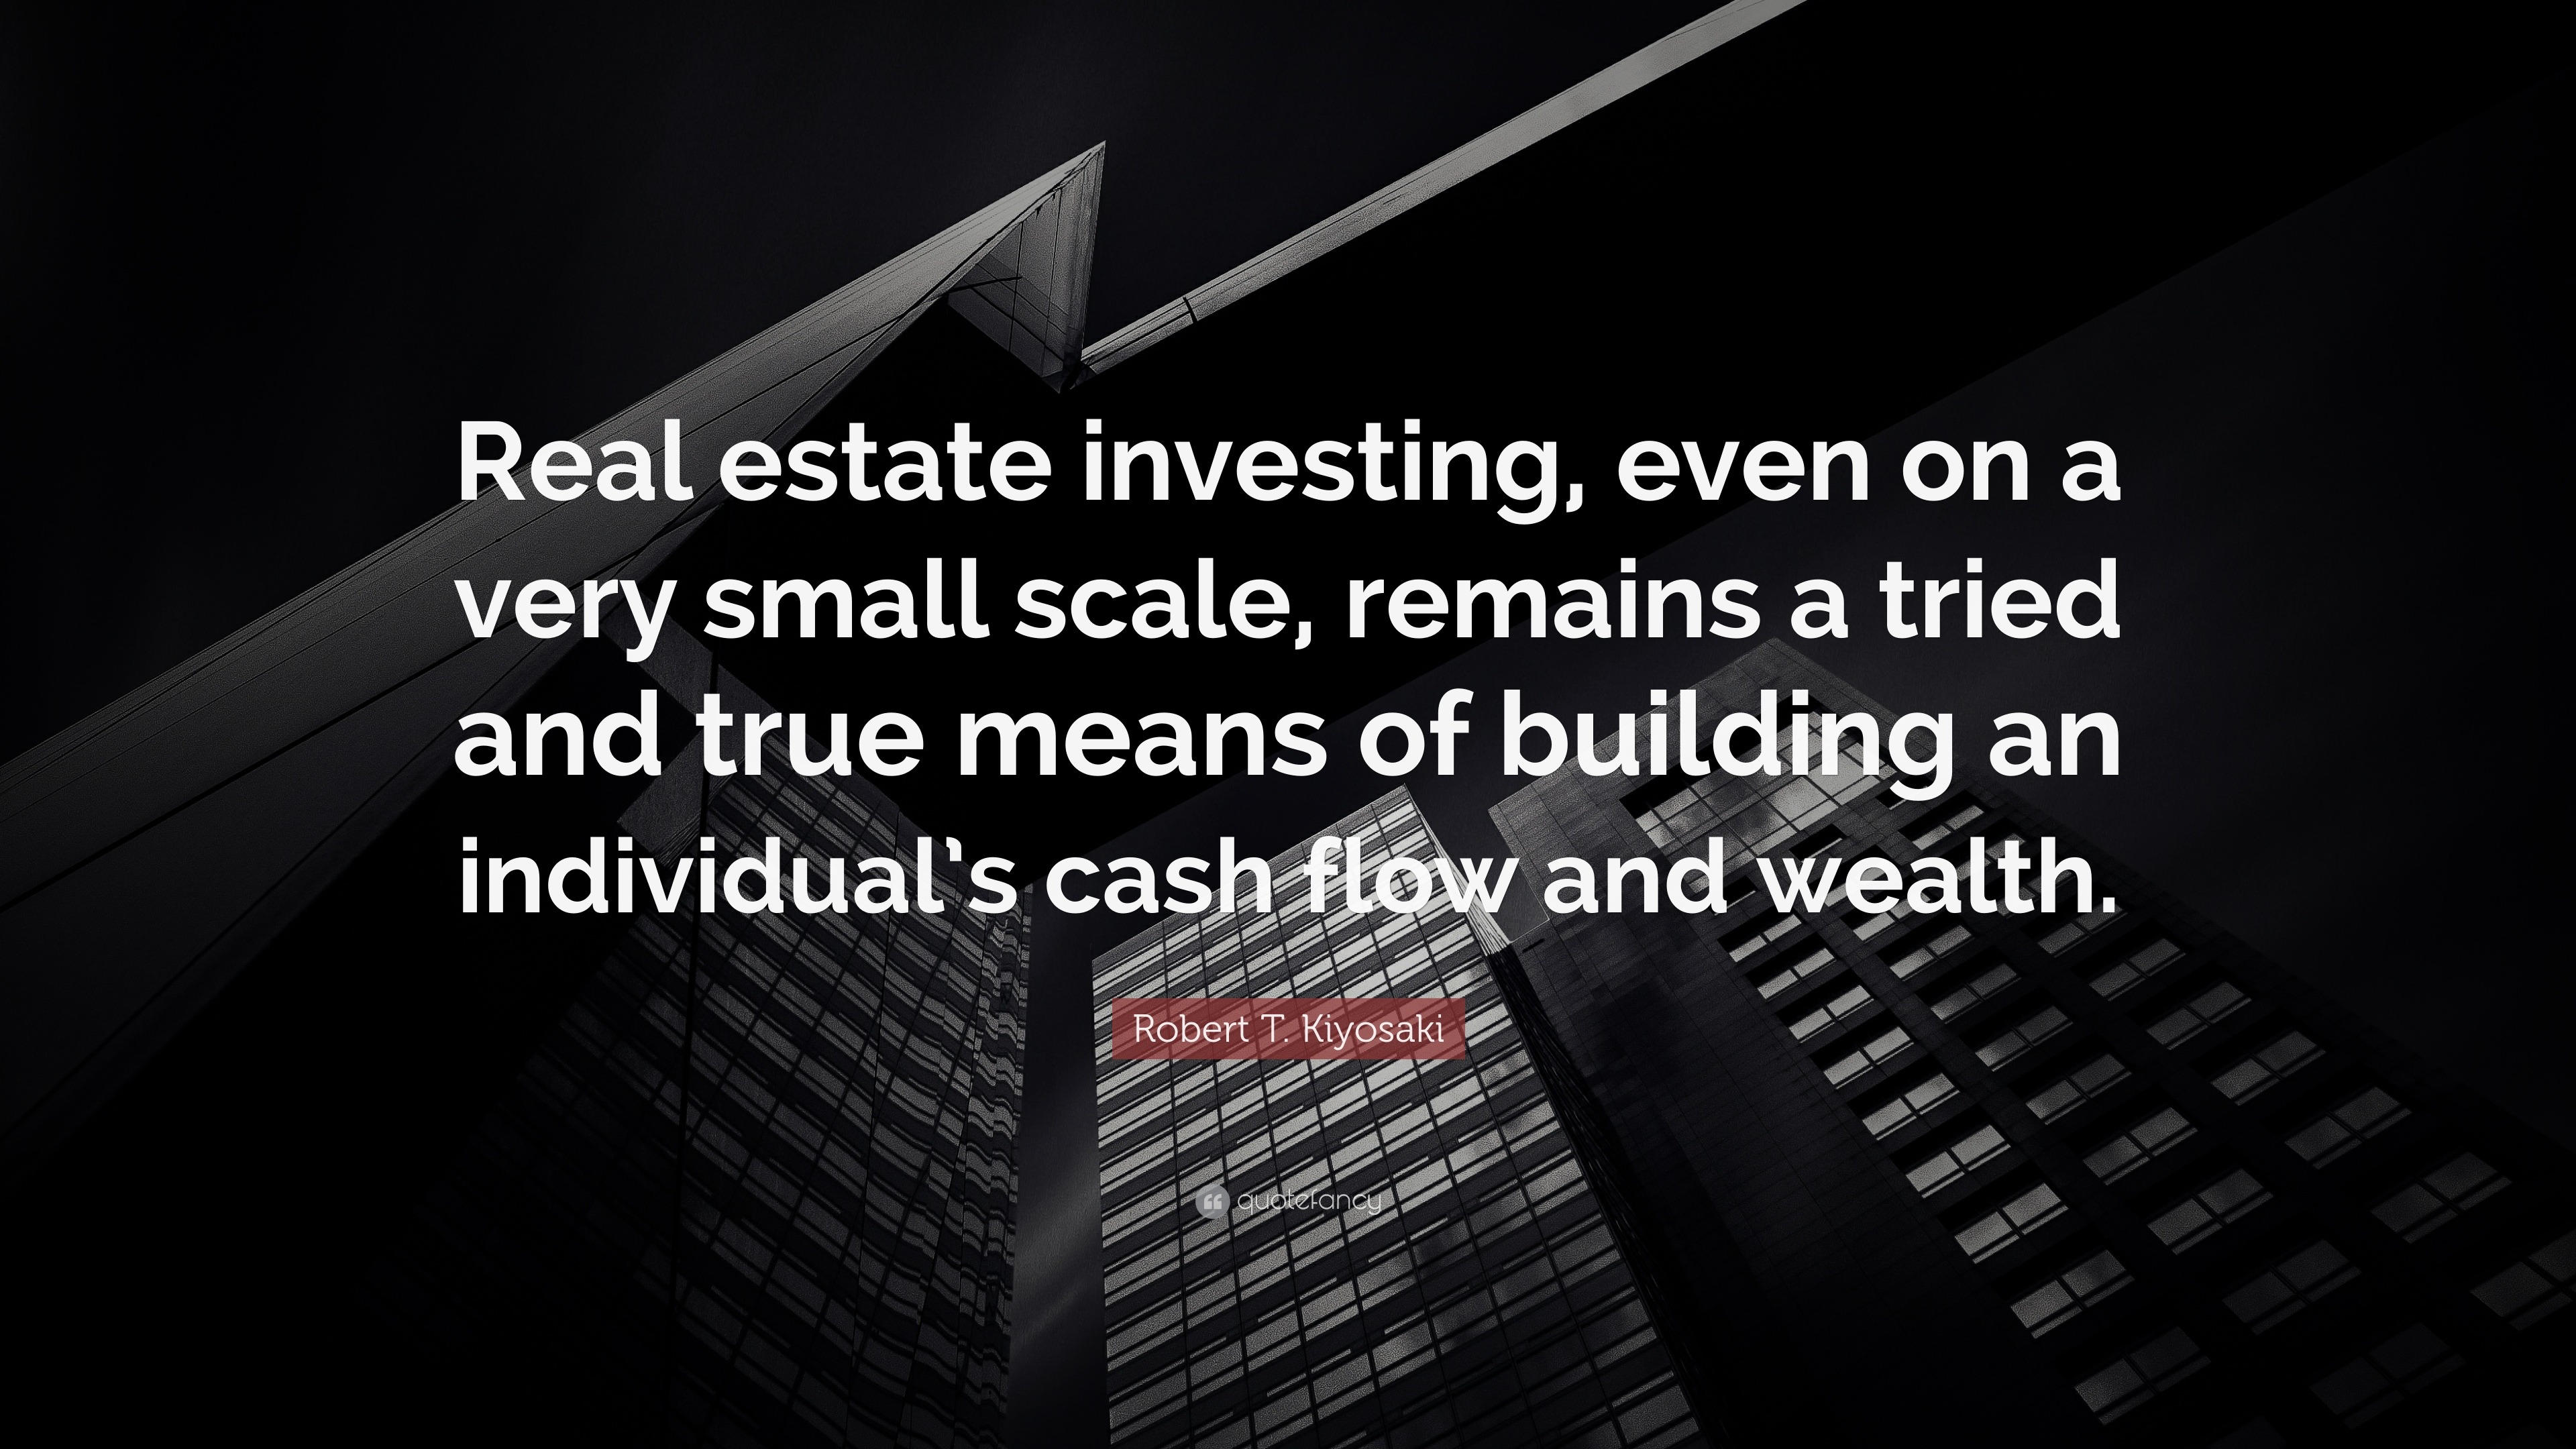 Robert T. Kiyosaki Quote: “Real estate investing, even on a very small scale, remains a tried and true means of building an individual's cash flow ...”